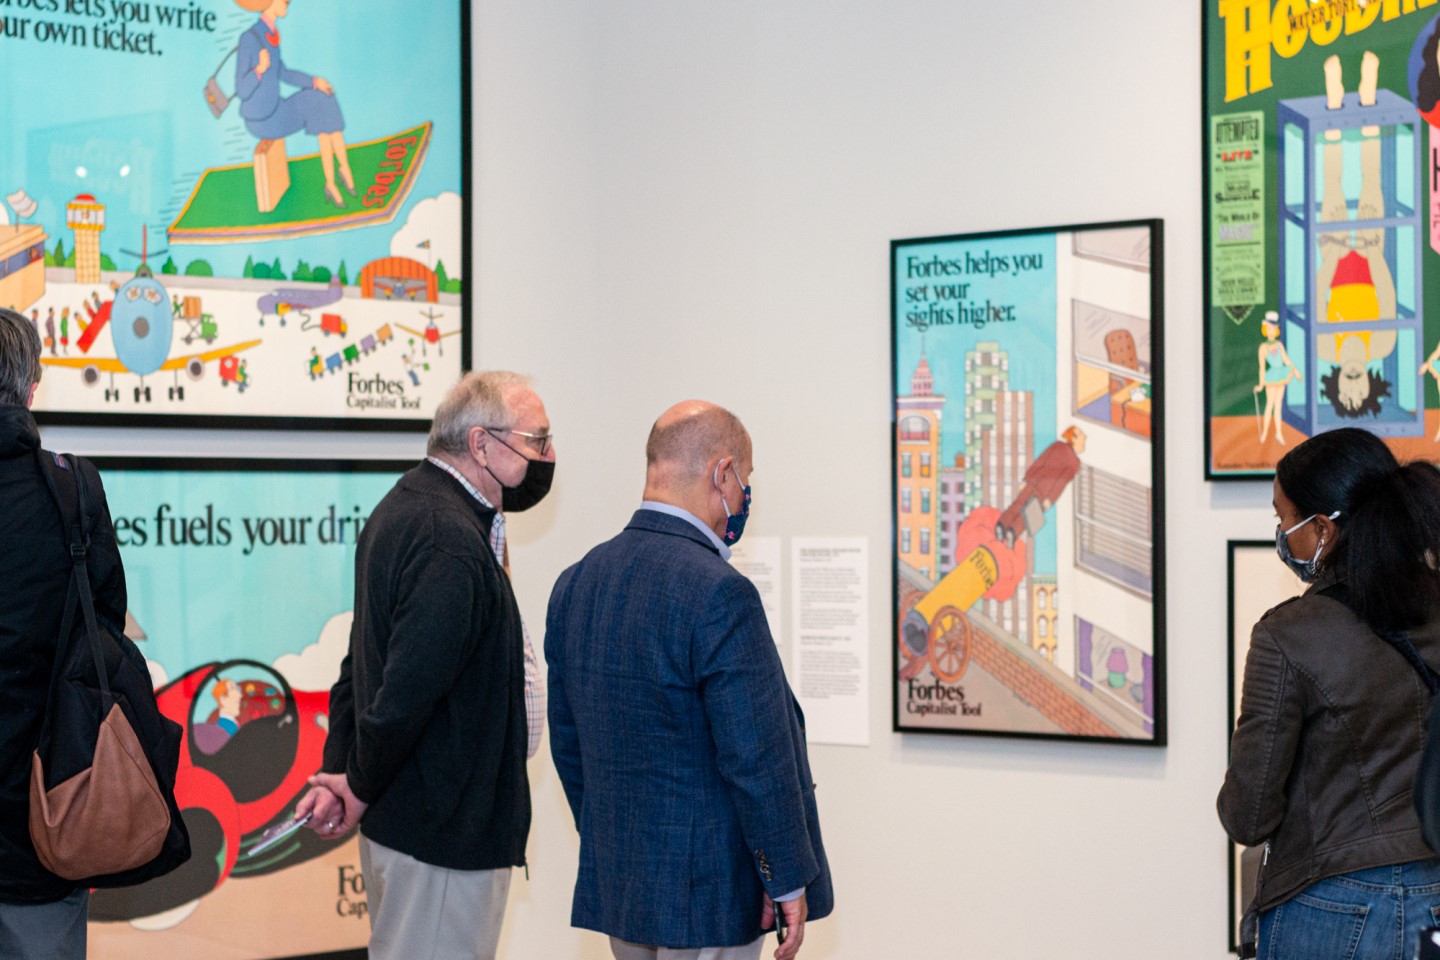 Two figures look at a poster on the wall surrounded by other posters and visitors.